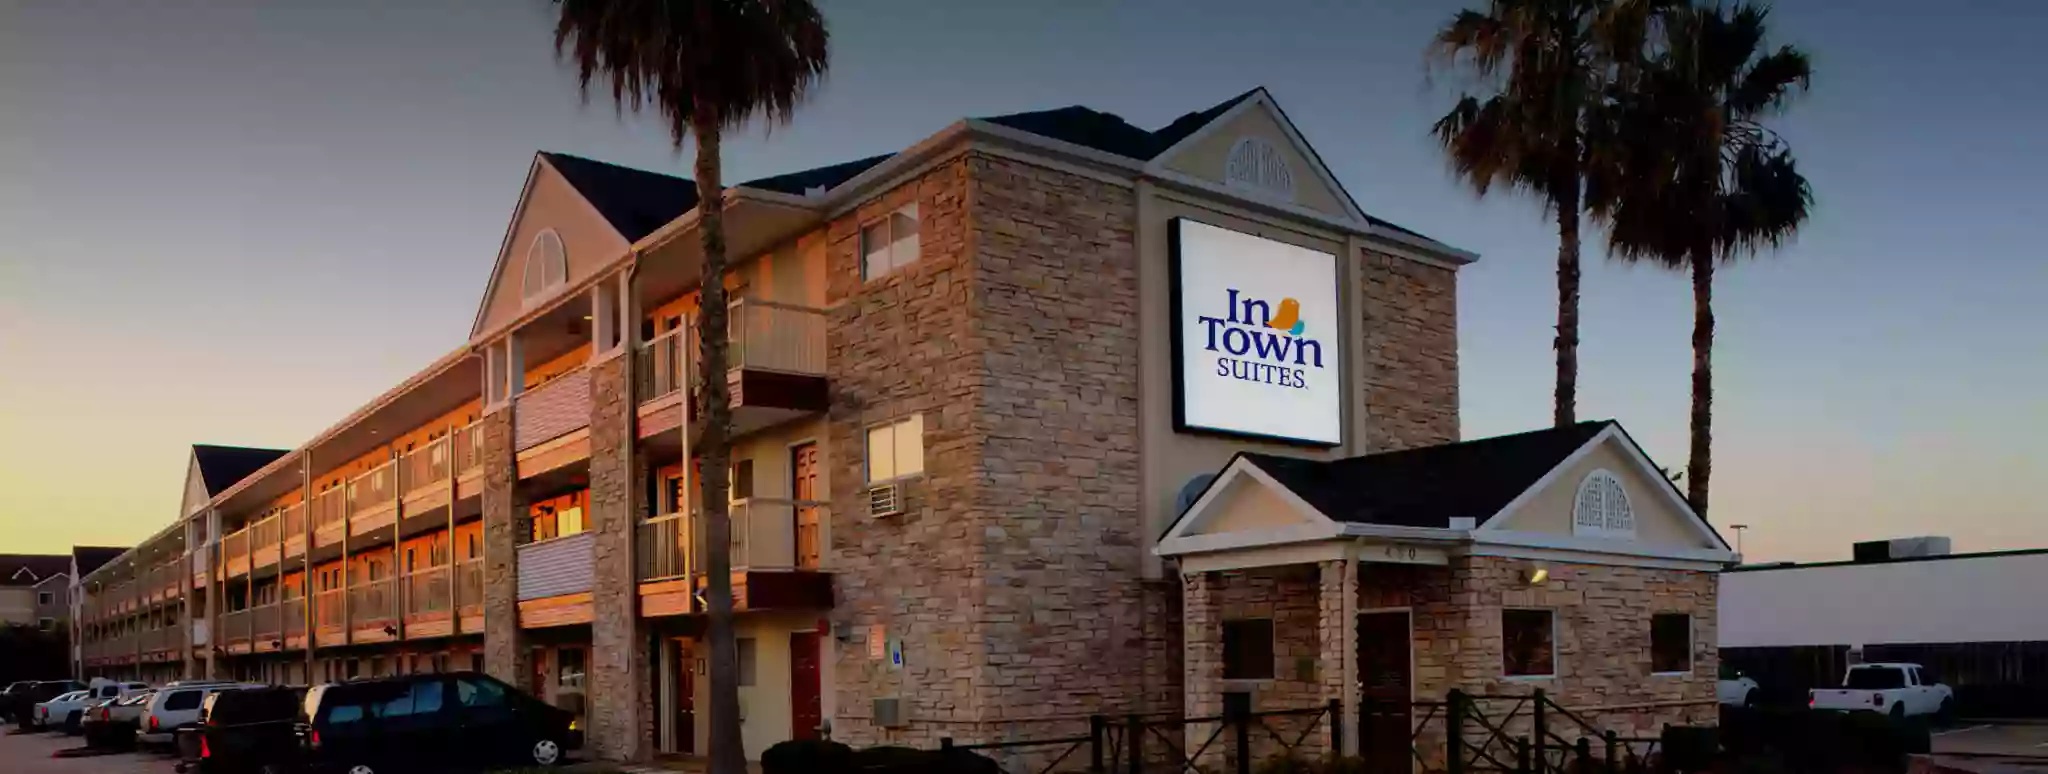 InTown Suites Extended Stay Tuscaloosa AL - University of Alabama